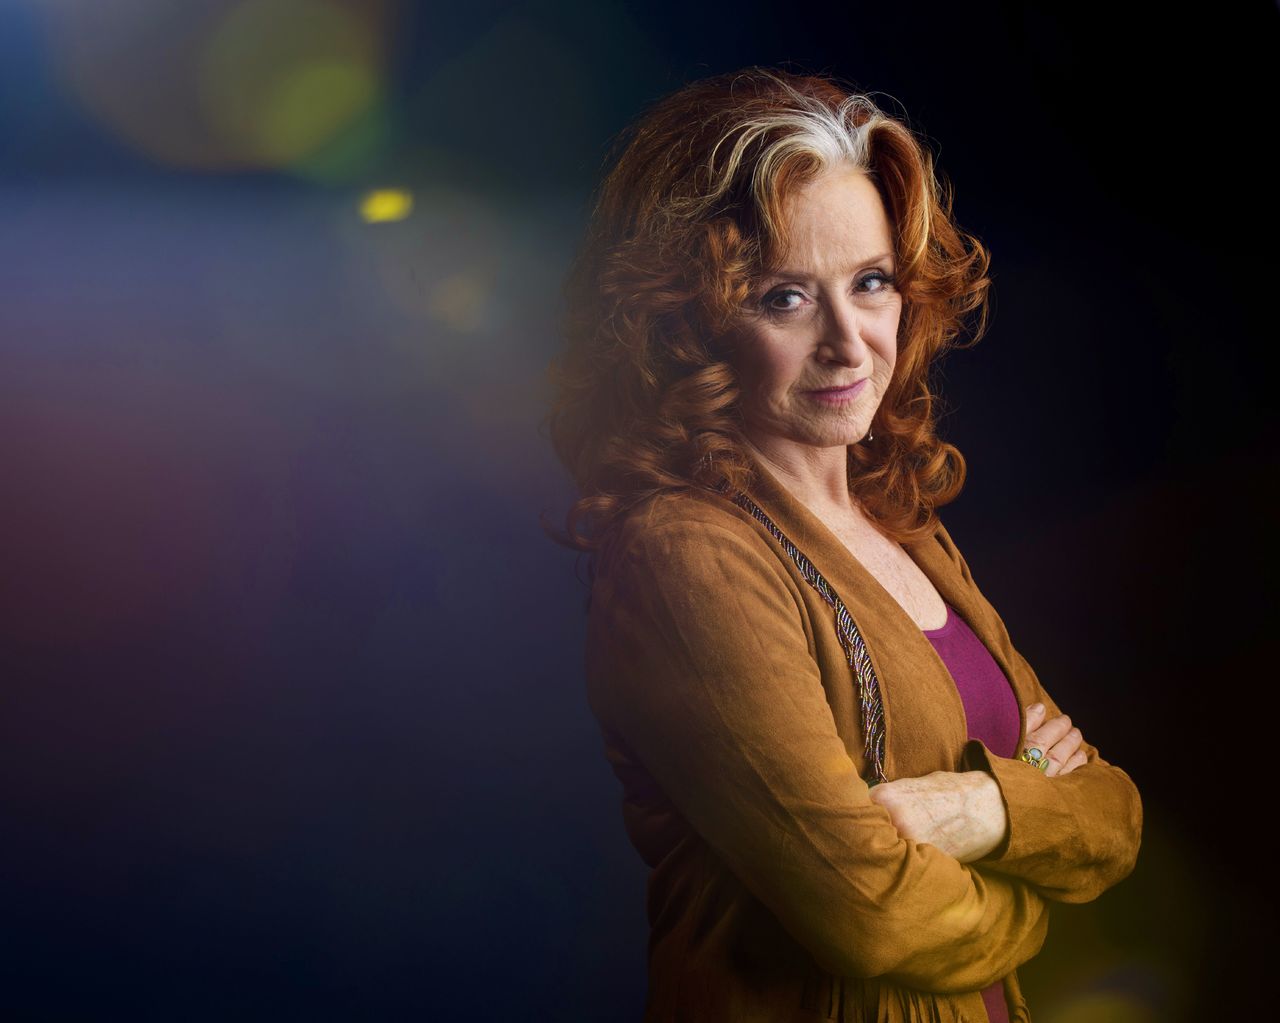 Singer Bonnie Raitt poses for a portrait in New York to promote her new album, “Dig In Deep.”